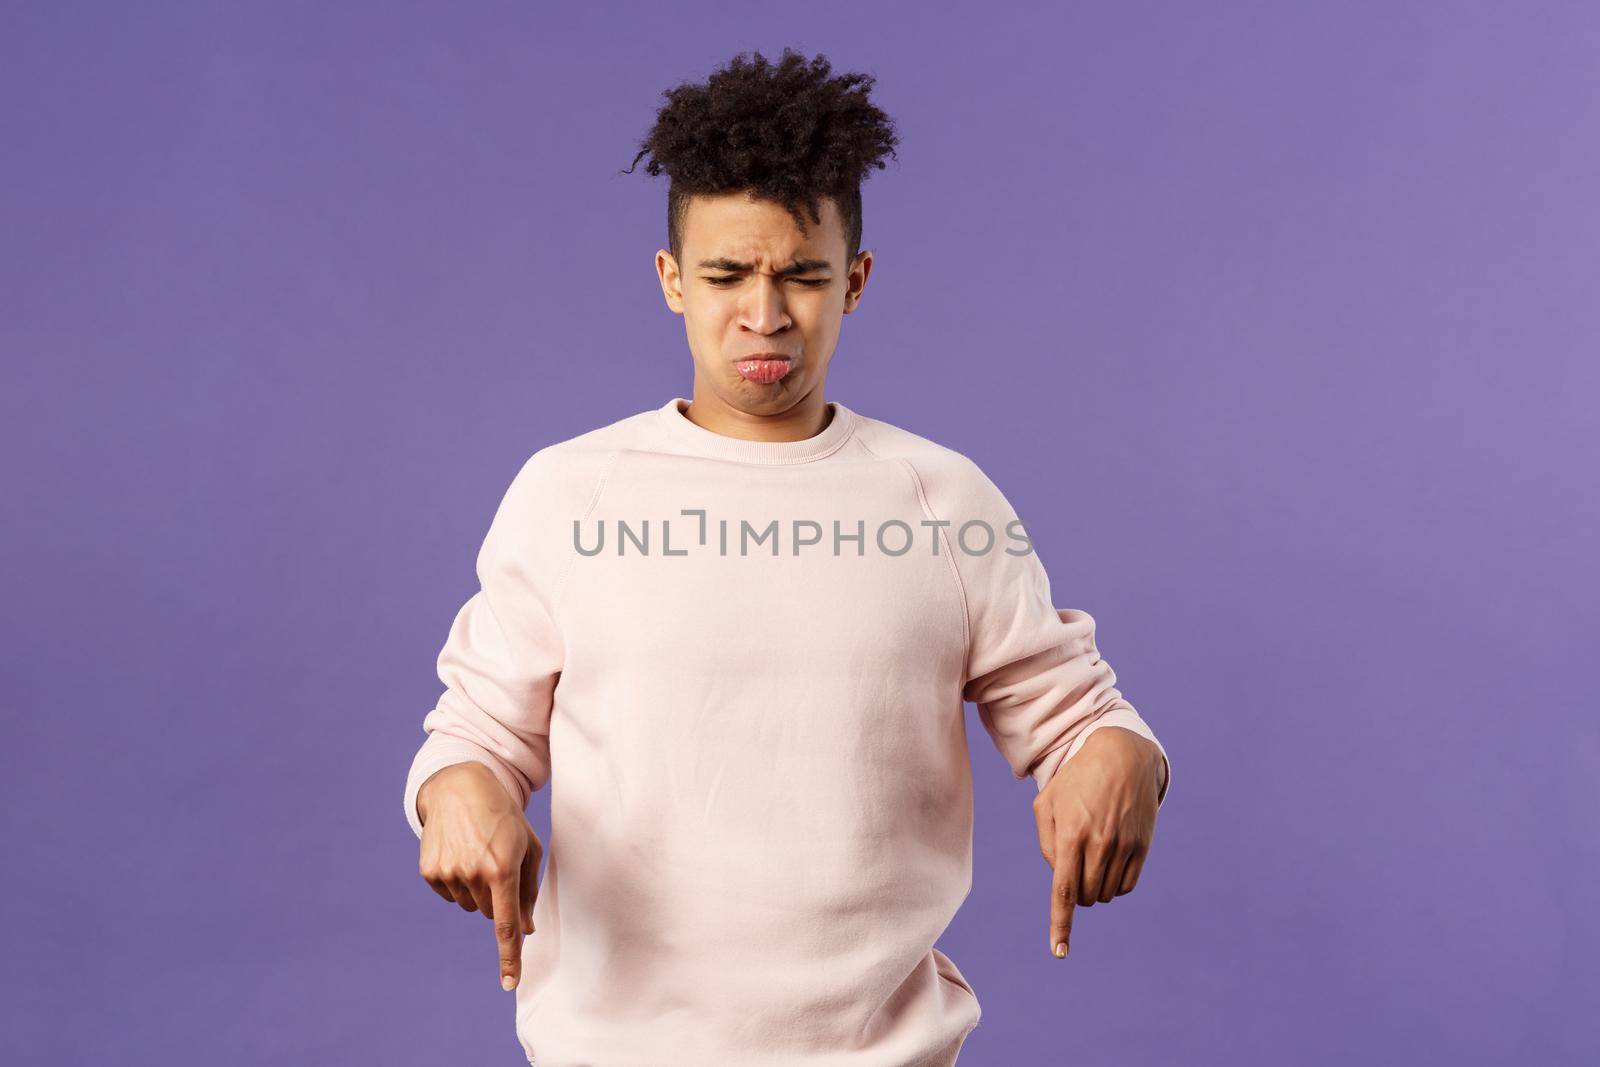 Portrait of gloomy and silly disappointed whining guy, sobbing and crying from envy or jealousy, regret missing chance, looking and pointing down with upset unhappy expression, purple background by Benzoix